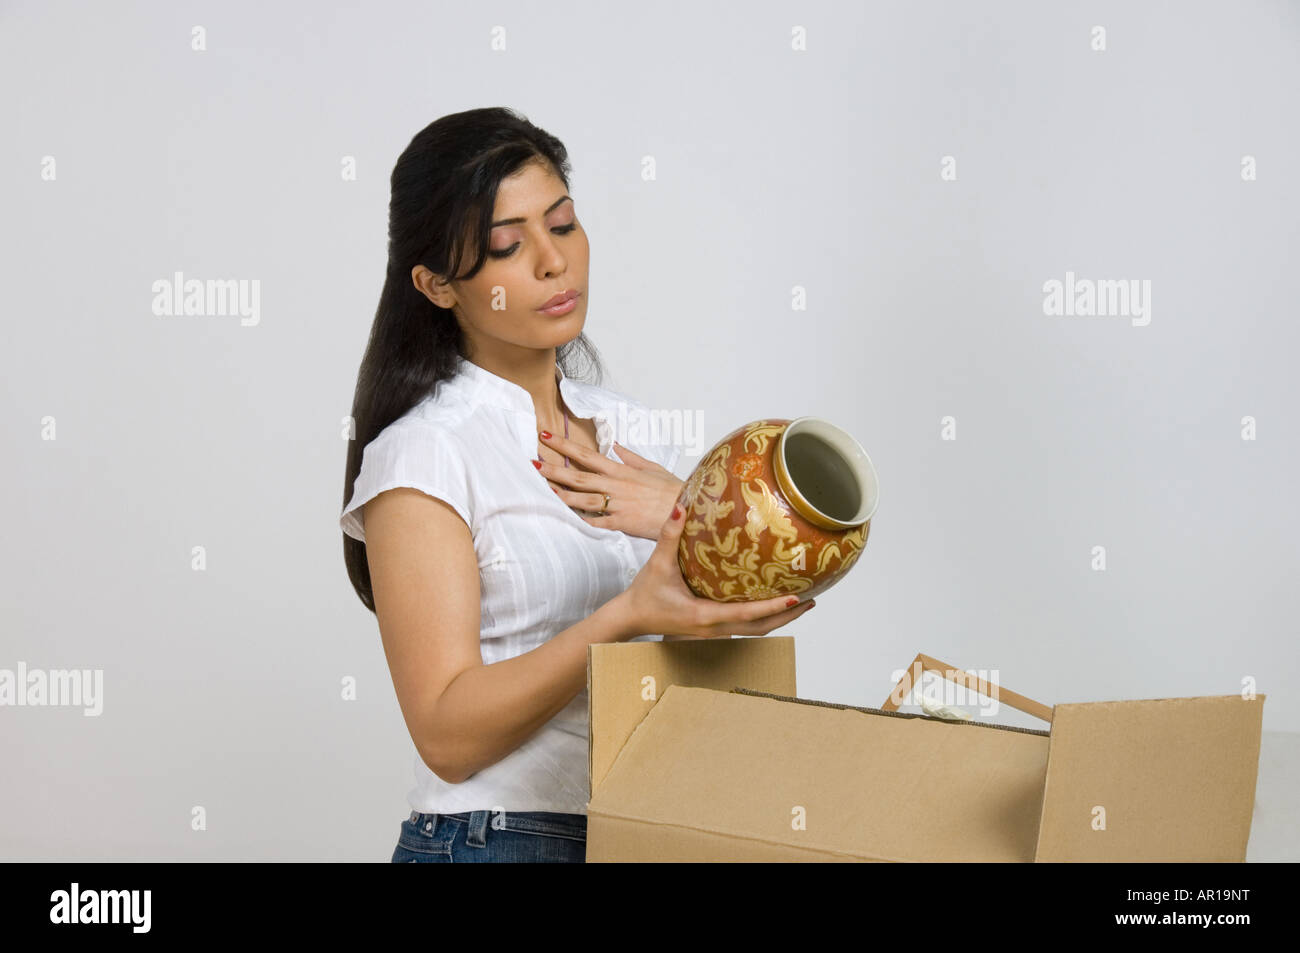 Young woman relieved artifact is safe on moving into a new home Stock Photo